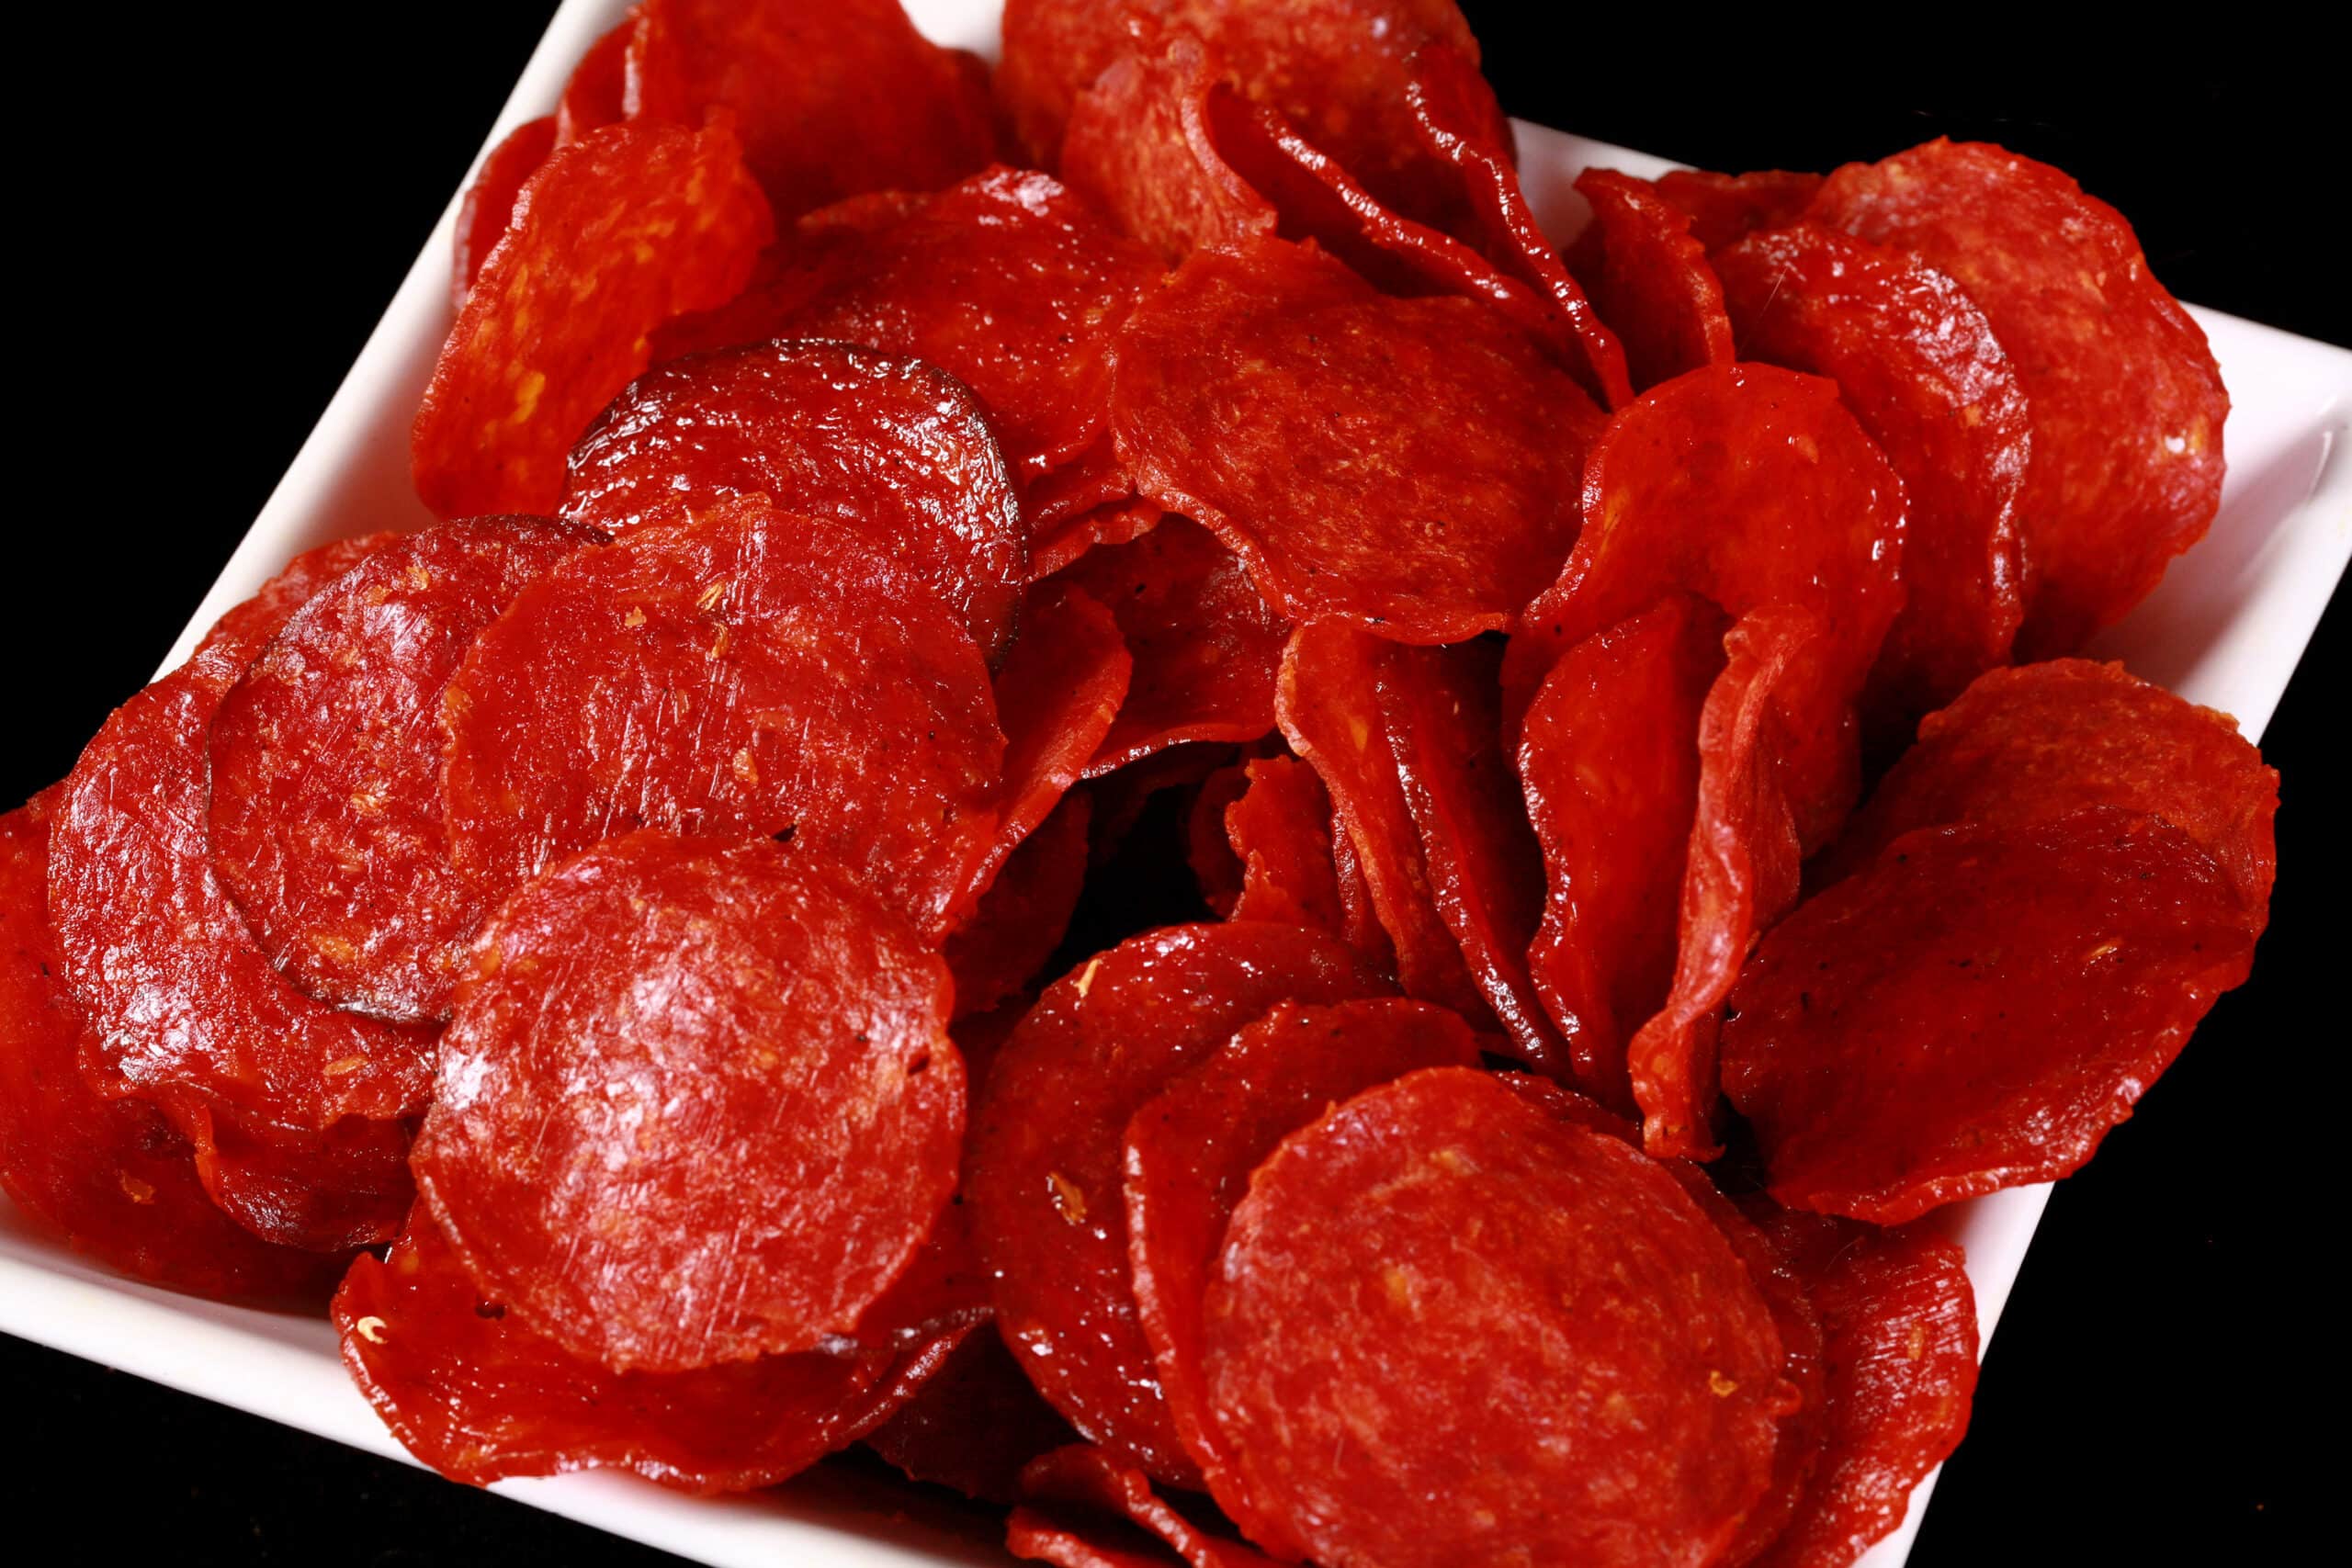 A bowl of pepperoni jerky slices.